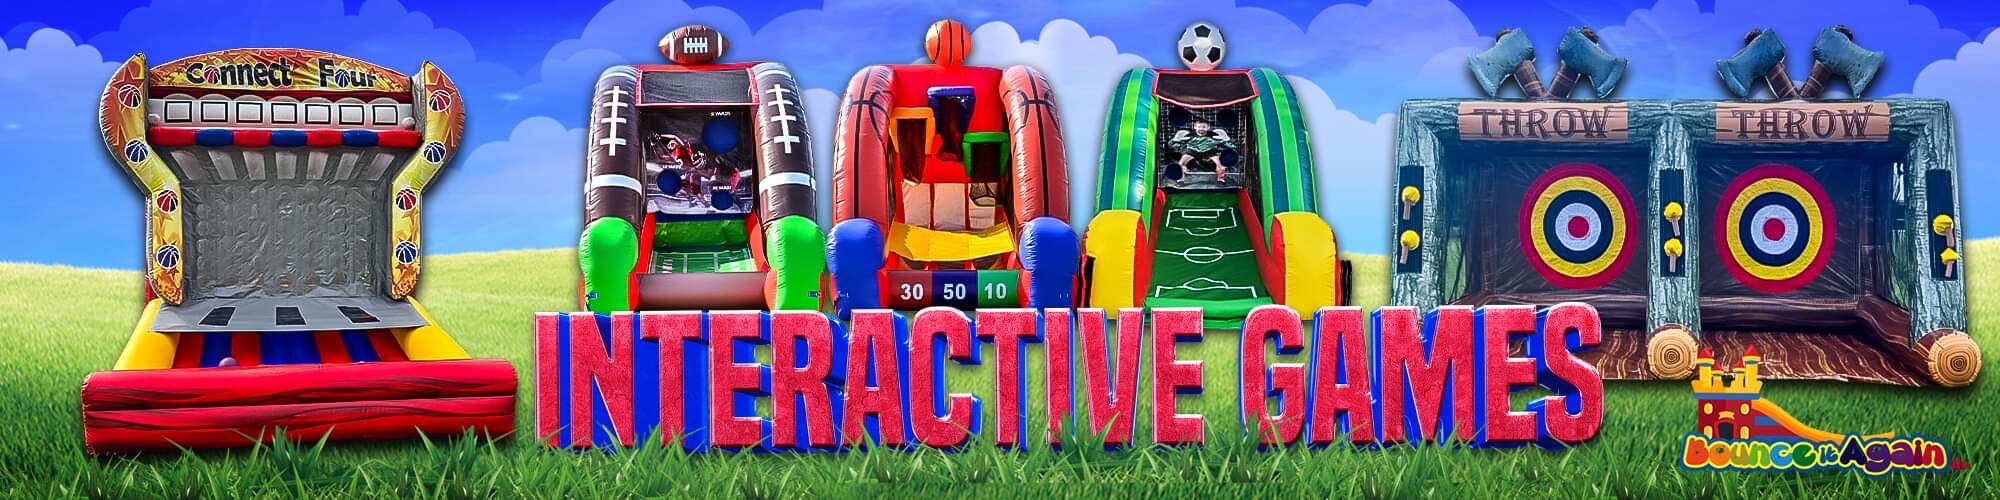 Interactive Game Rentals in Haines City, FL